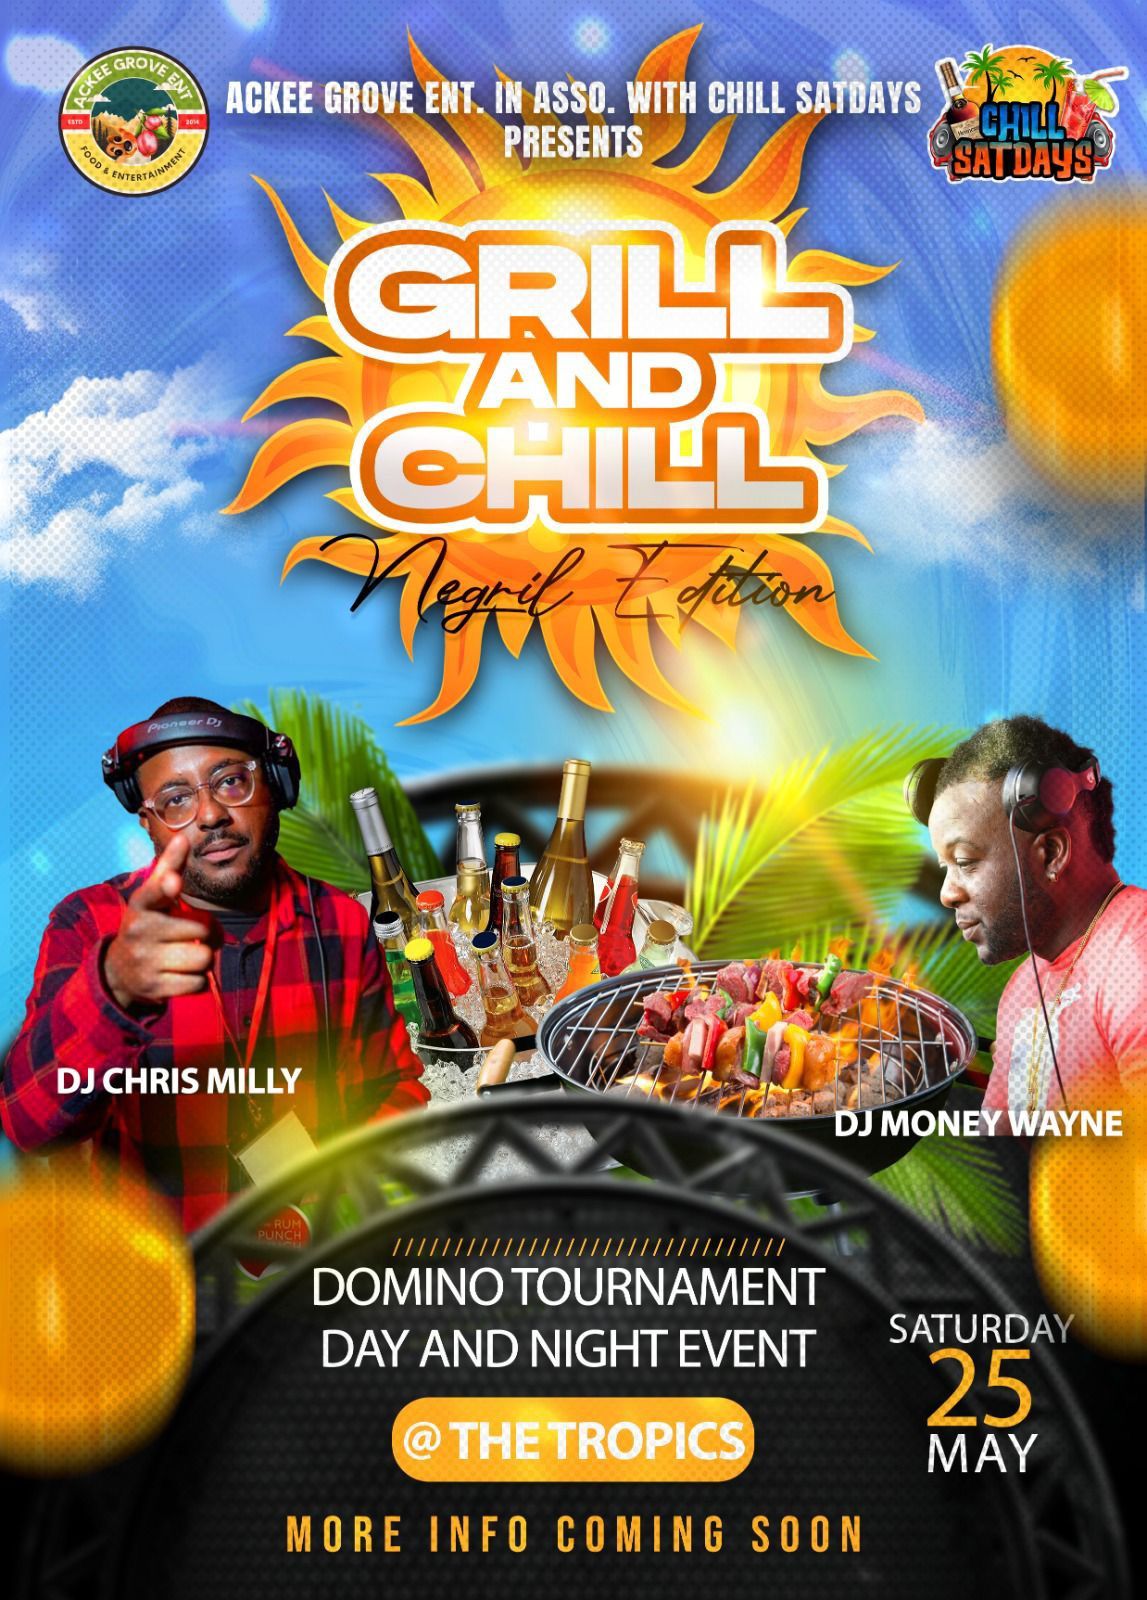 Grill & Chill